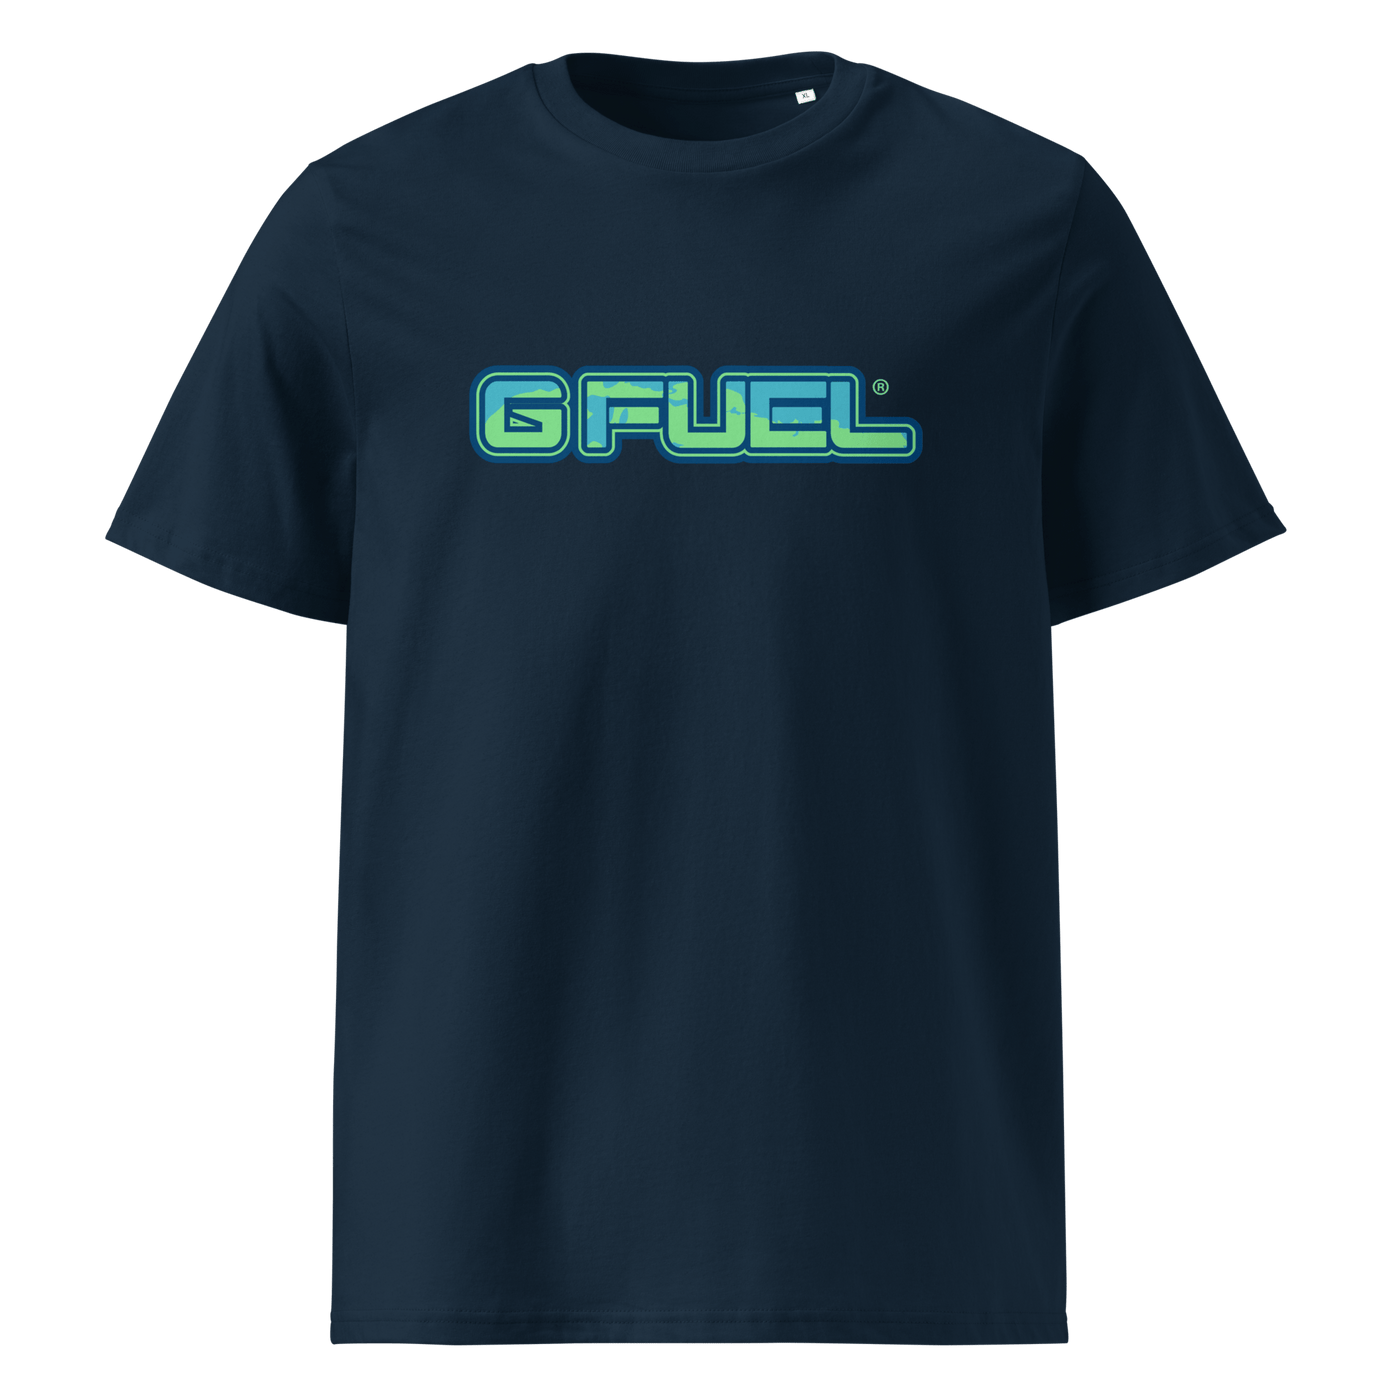 G FUEL| Earth Day Organic Cotton T-Shirt French Navy S 3445114_11879